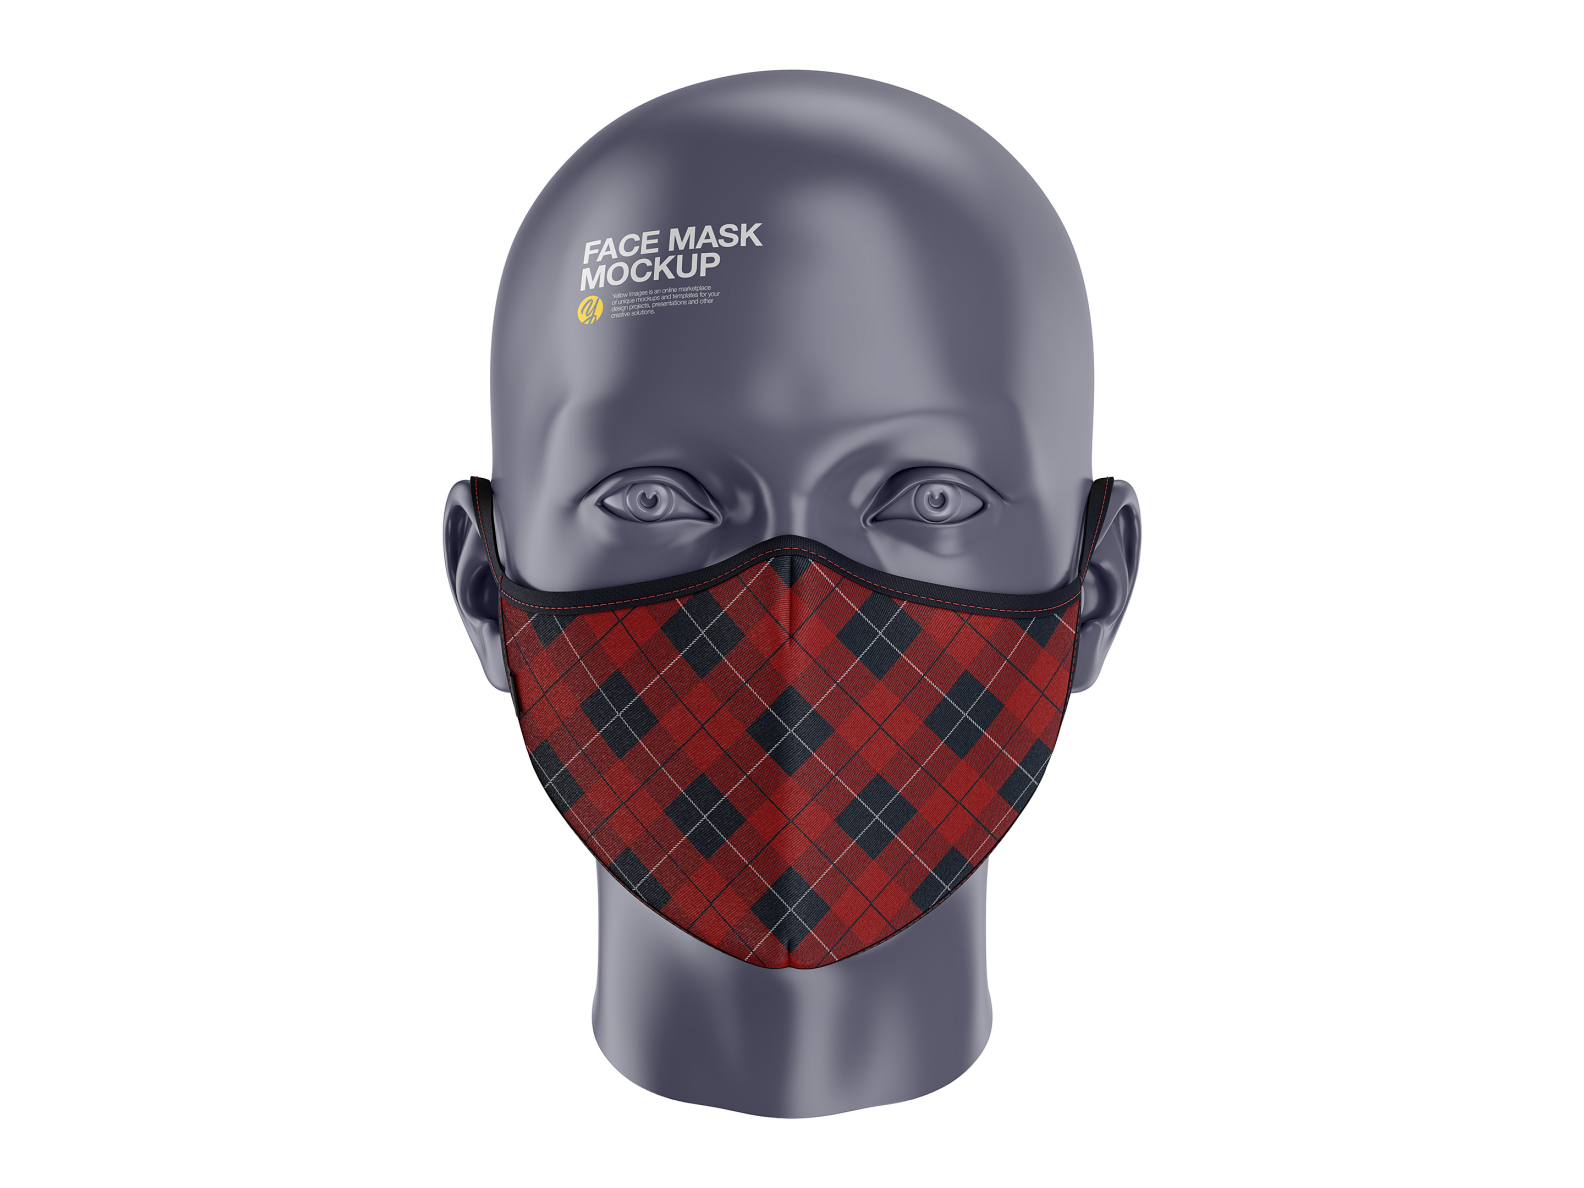 Download Face Mask Mockup by CG Tailor on Dribbble